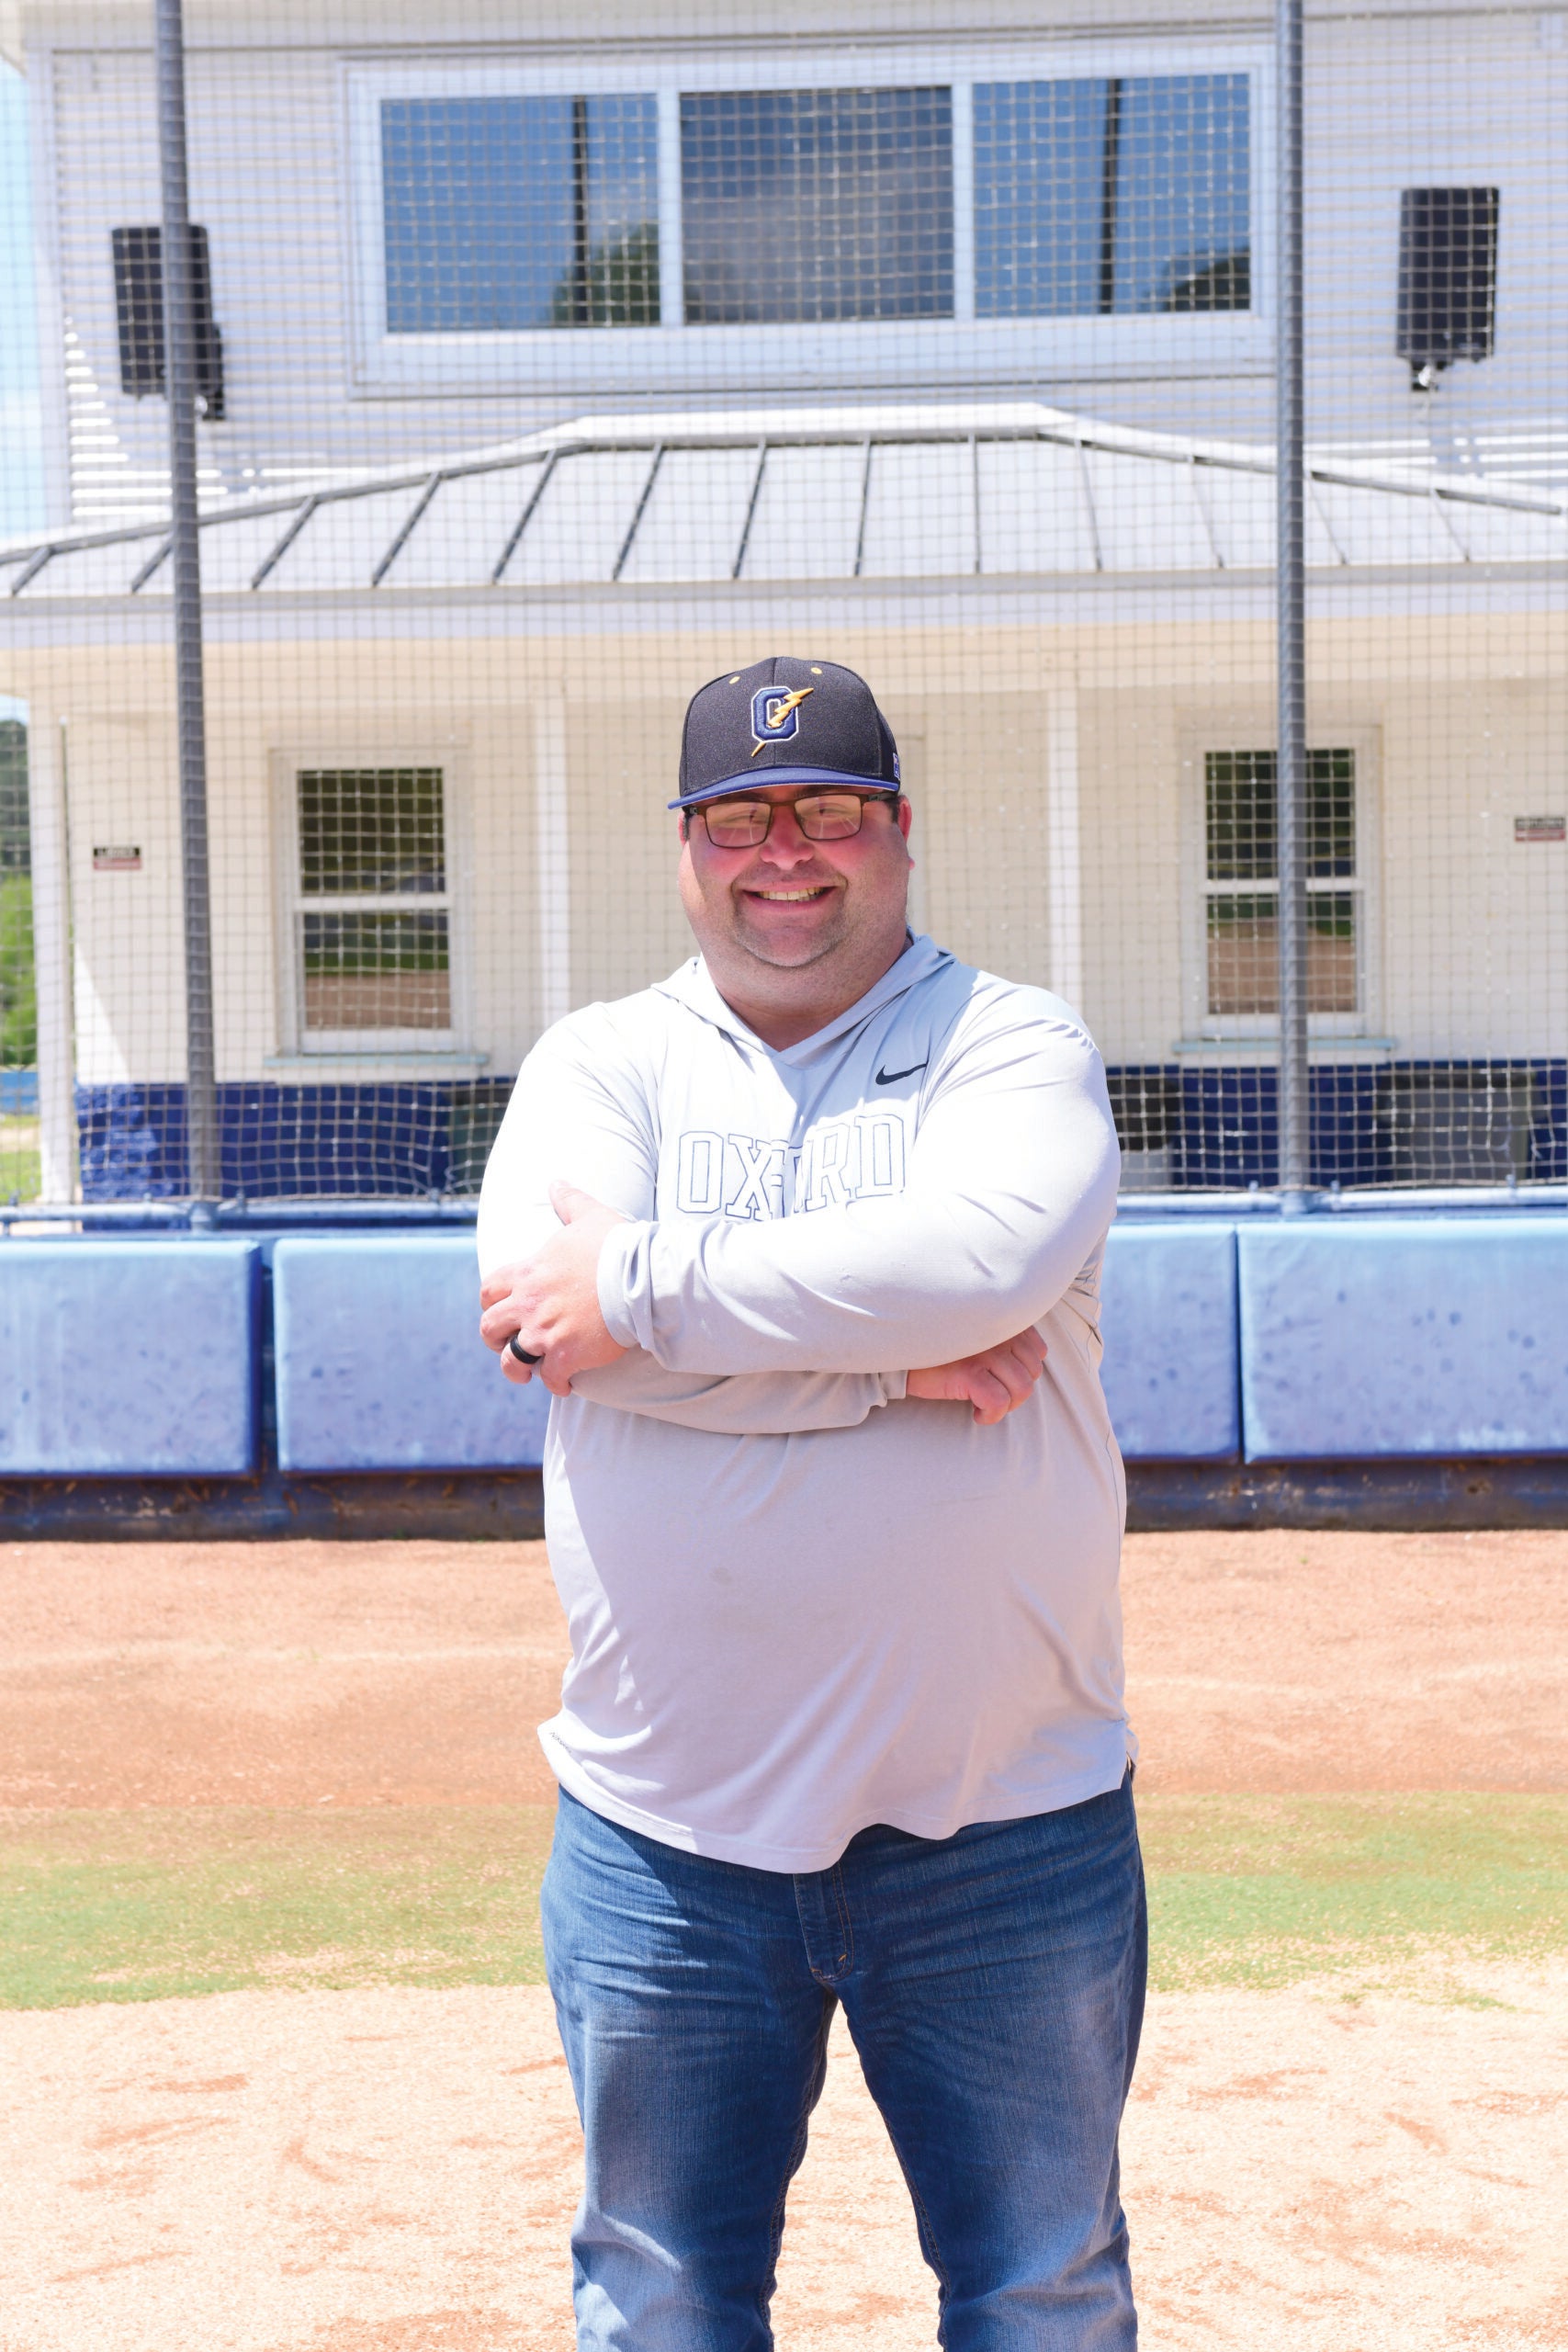 Born to coach: Long finds his path on the diamond